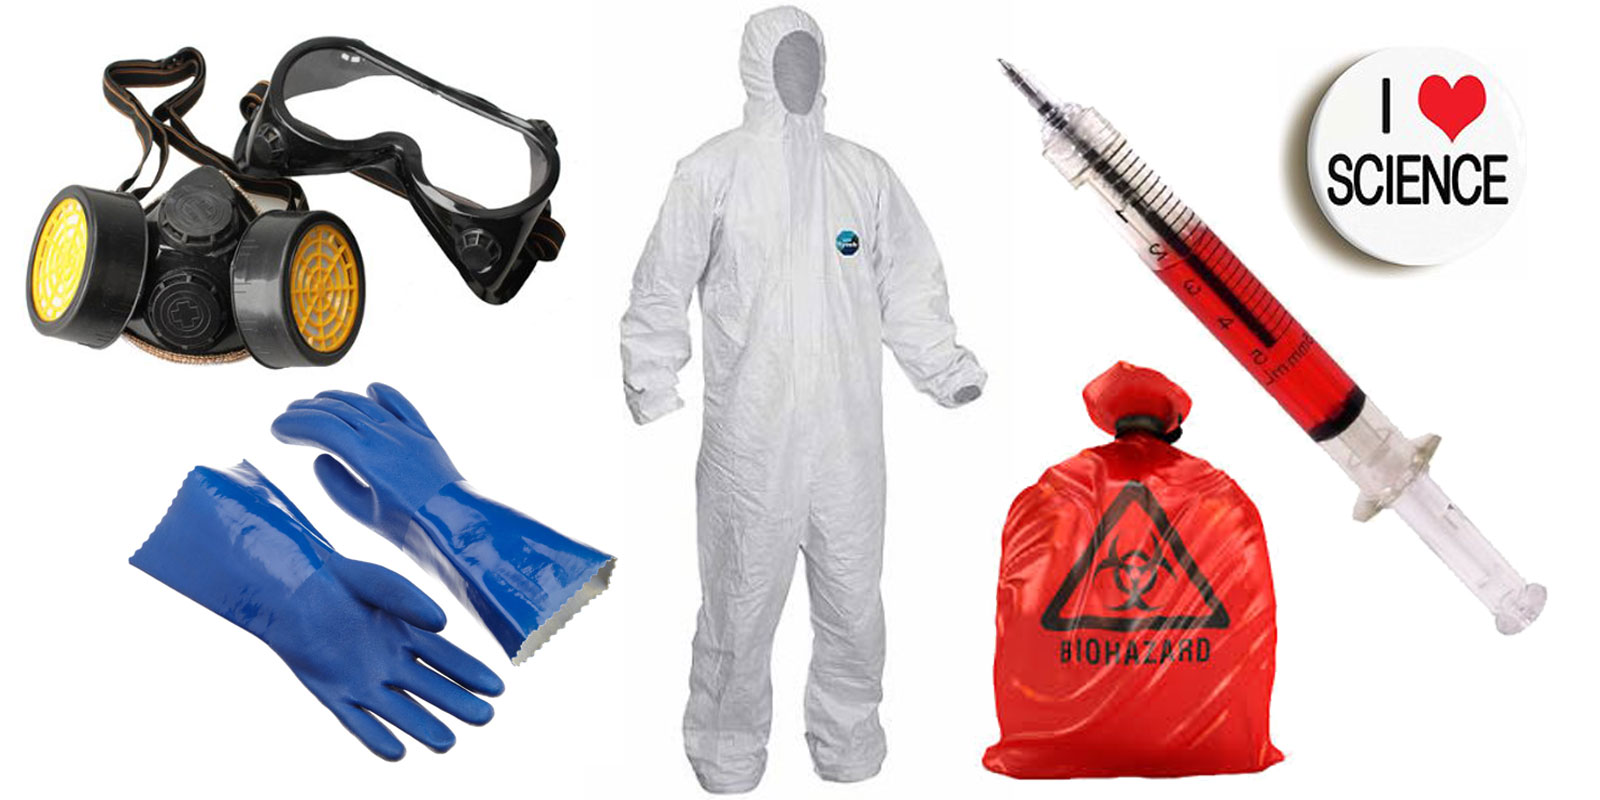 government-costume-cdc-inspector